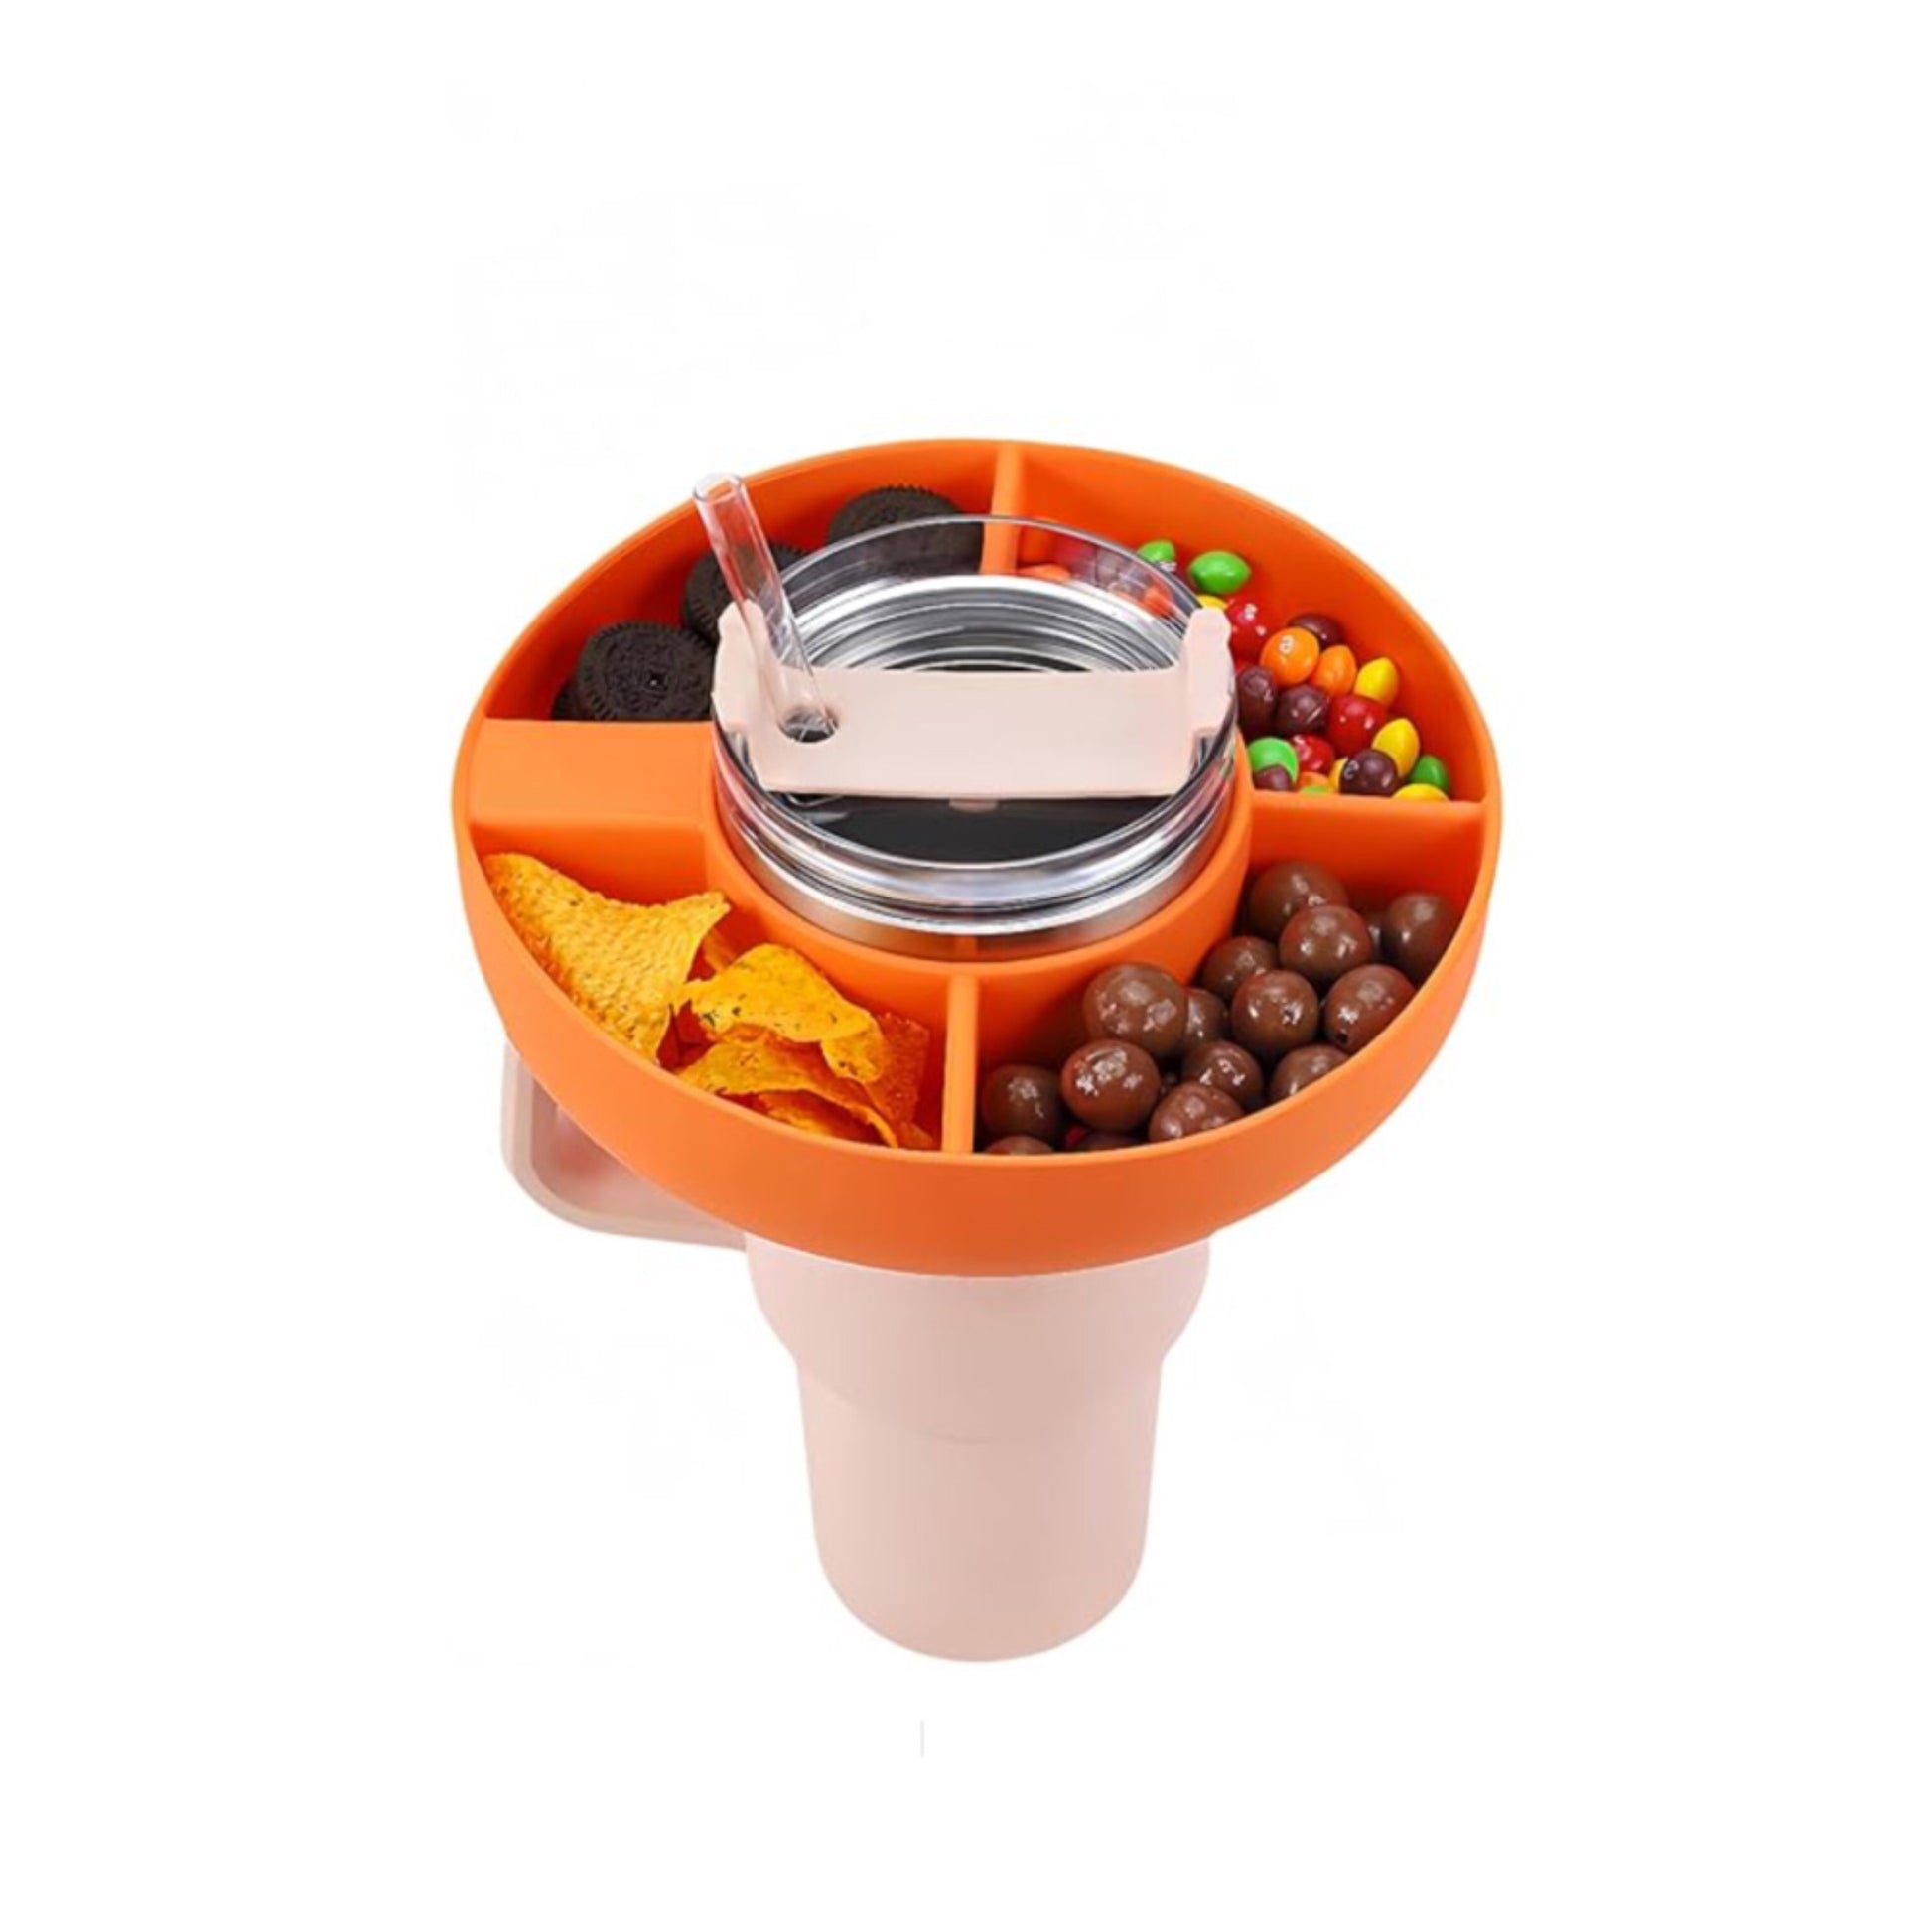 You Can Now Get A Reusable Snack Tray For Your Stanley Tumbler and